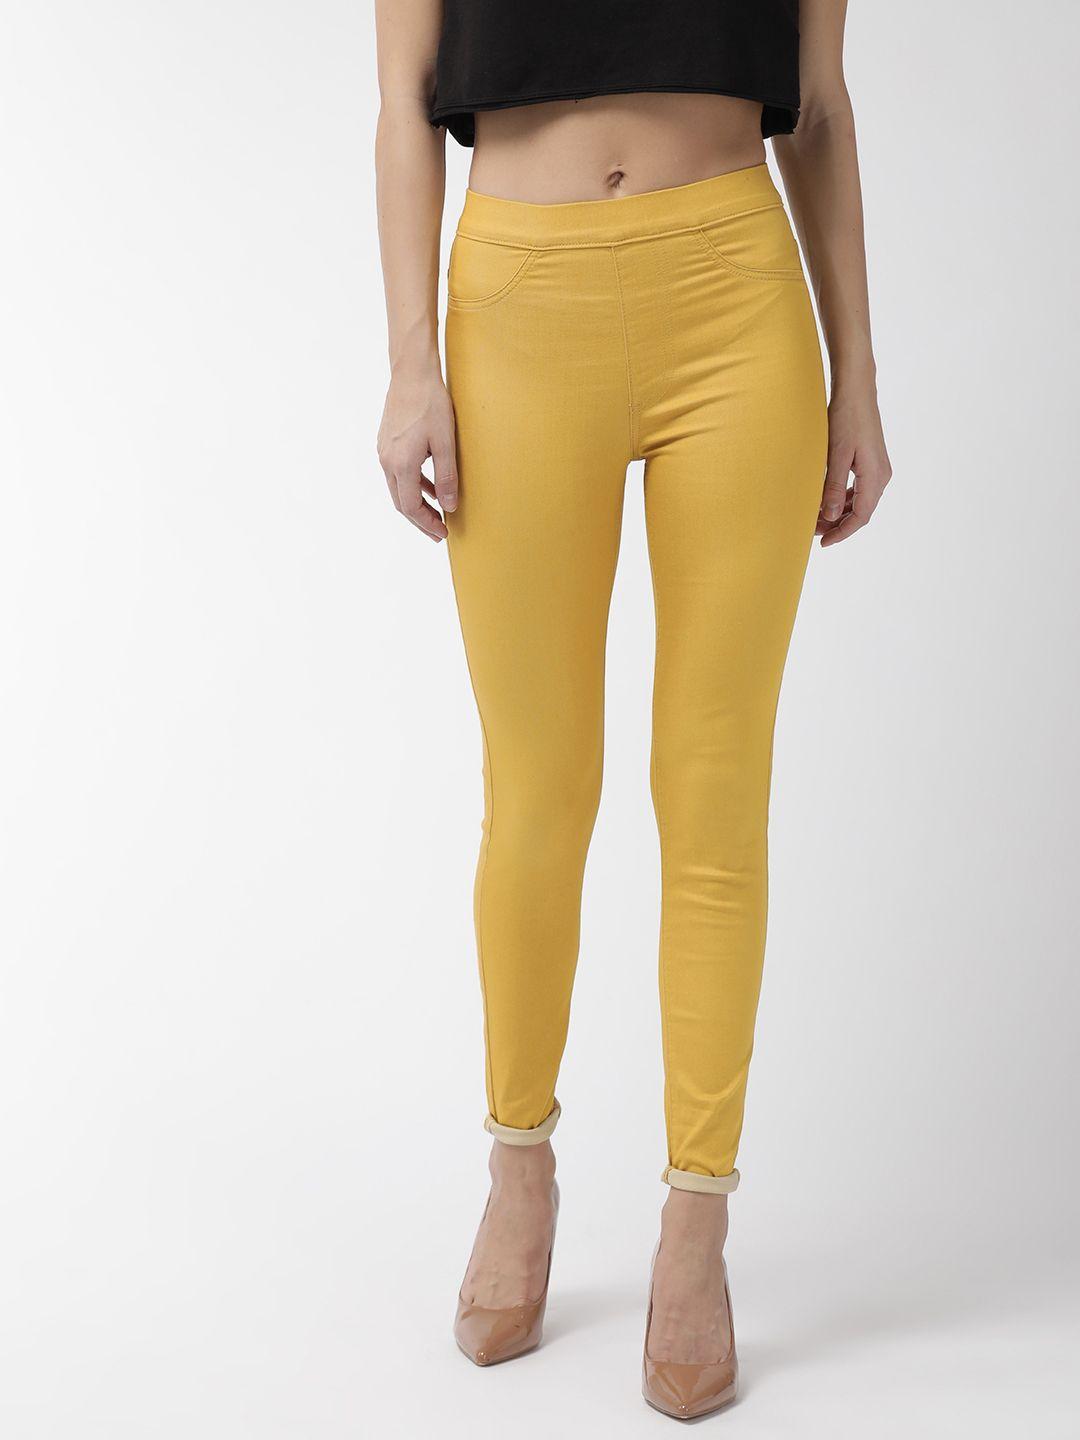 marks-&-spencer-women-mustard-yellow-solid-jeggings